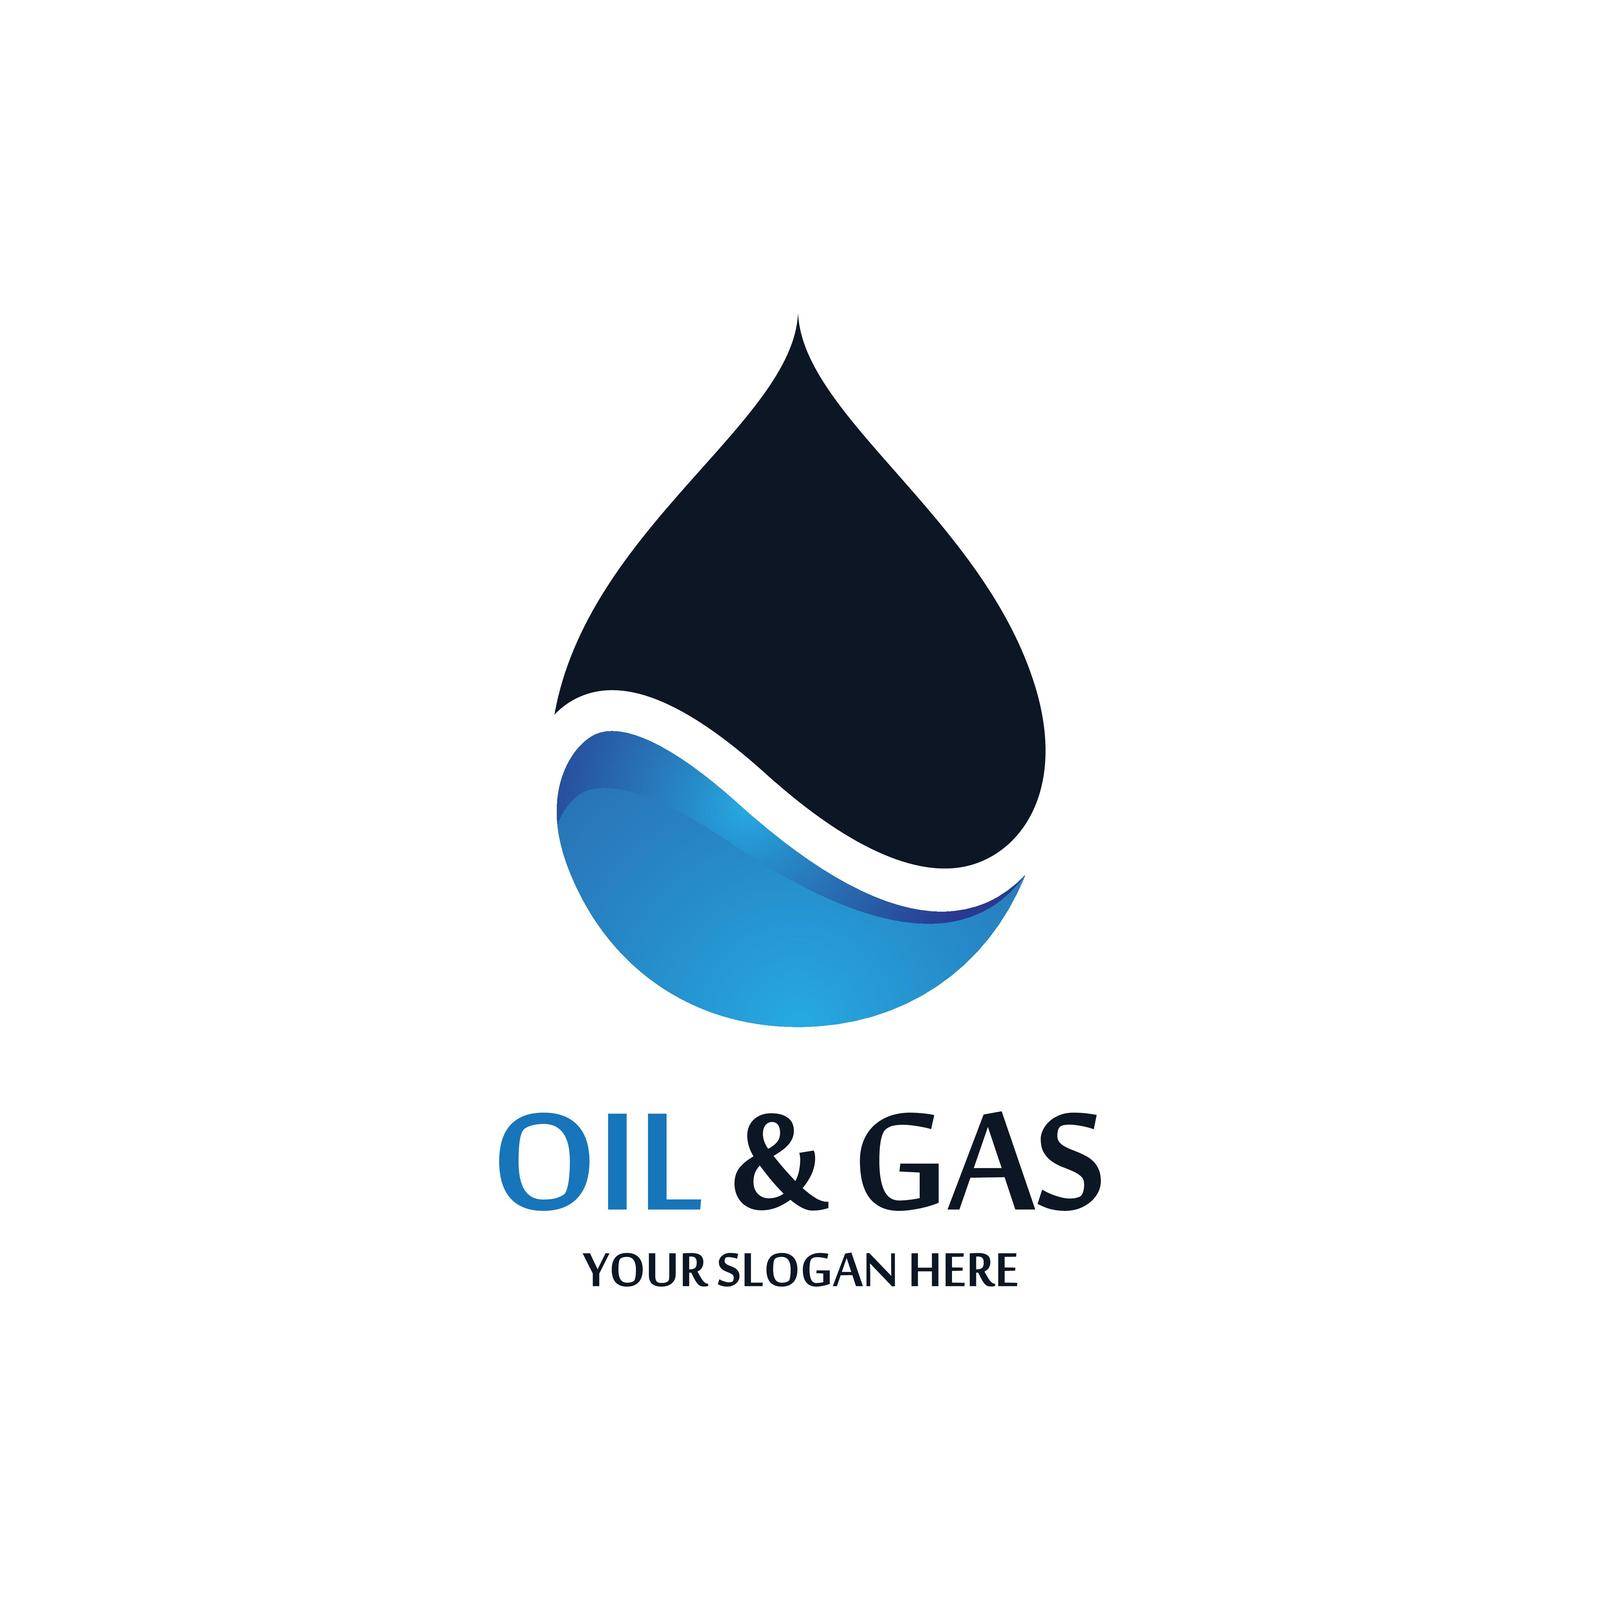 Oil and gas icon vector by Fat17